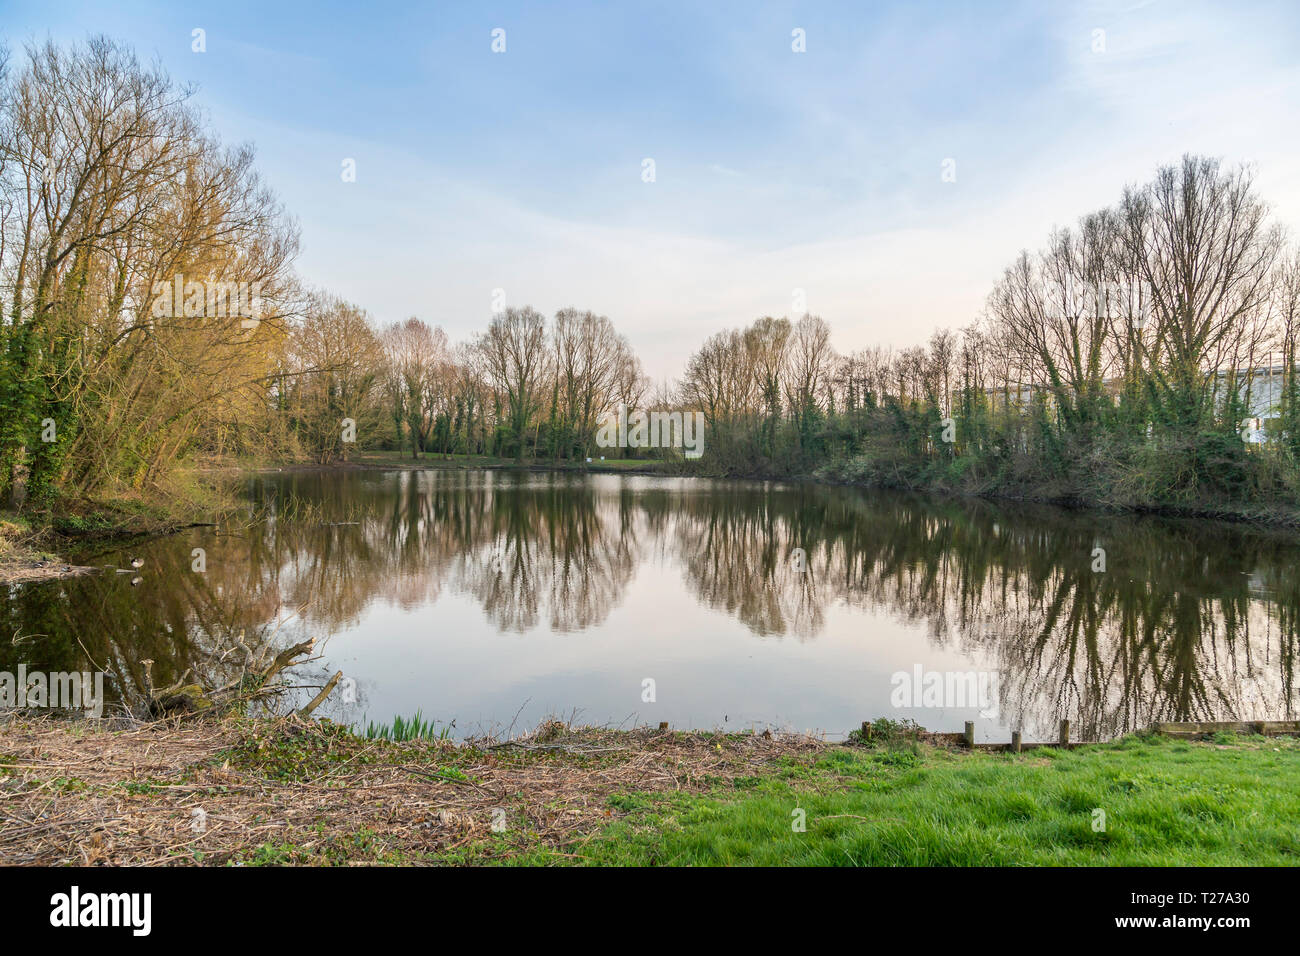 Lakeside view, Ipsley Mill Pond in Redditch, Worcestershire, England Stock Photo